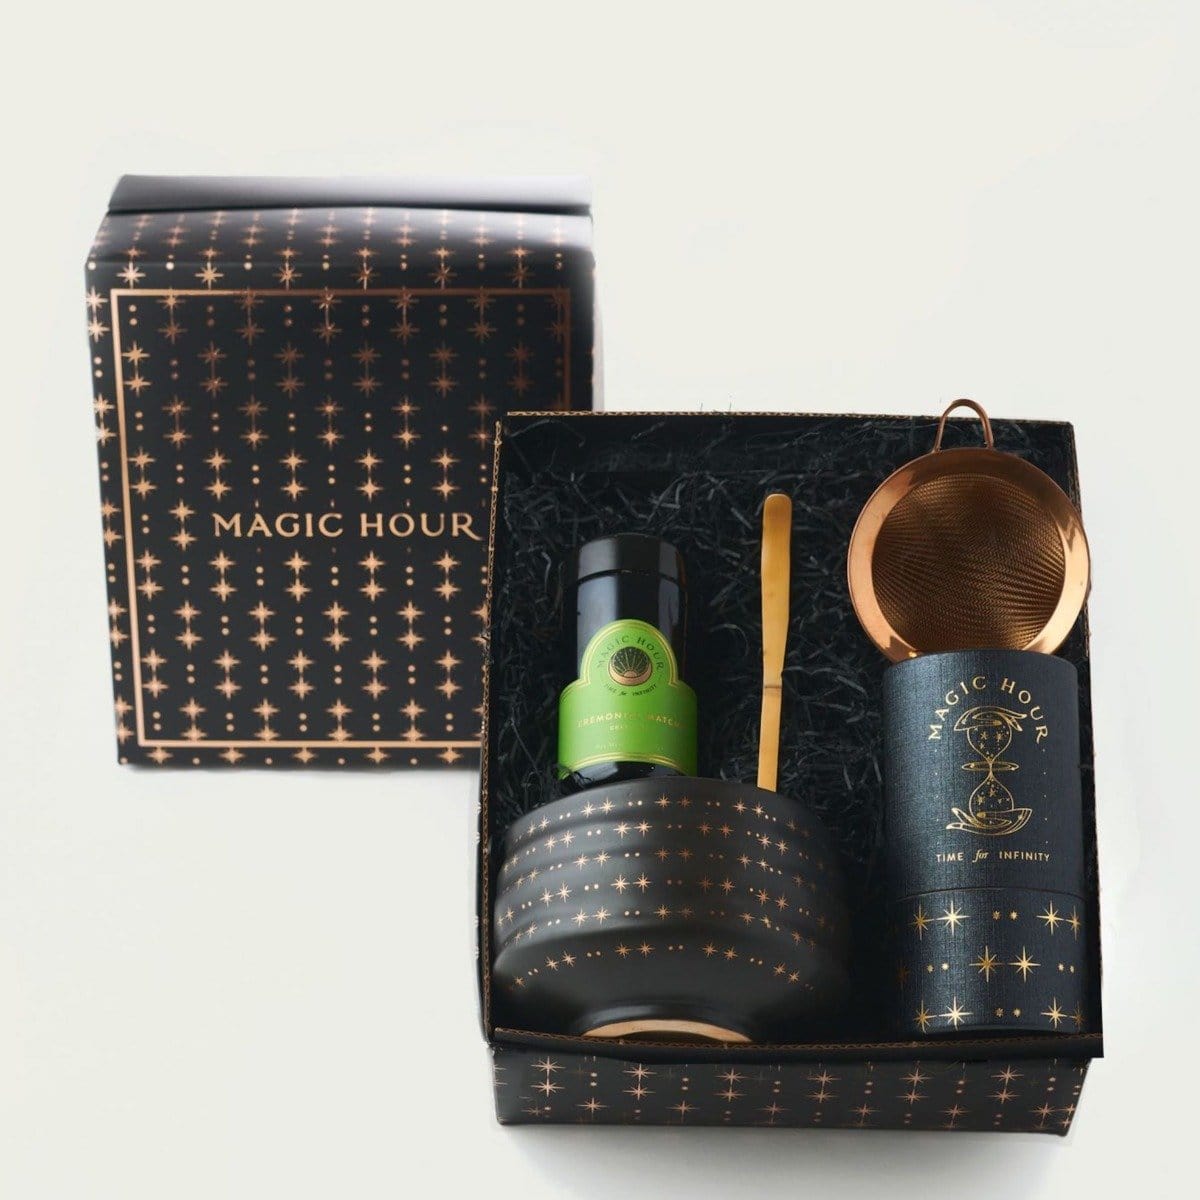 Ceremonial Matcha Traveler Gift Box with a "Magic Hour" theme. Includes a tin of loose leaf tea, green tea bottle, golden tea spoon, black tea bowl with metallic dots, and copper tea strainer. Set is displayed in a black box with a starry pattern.